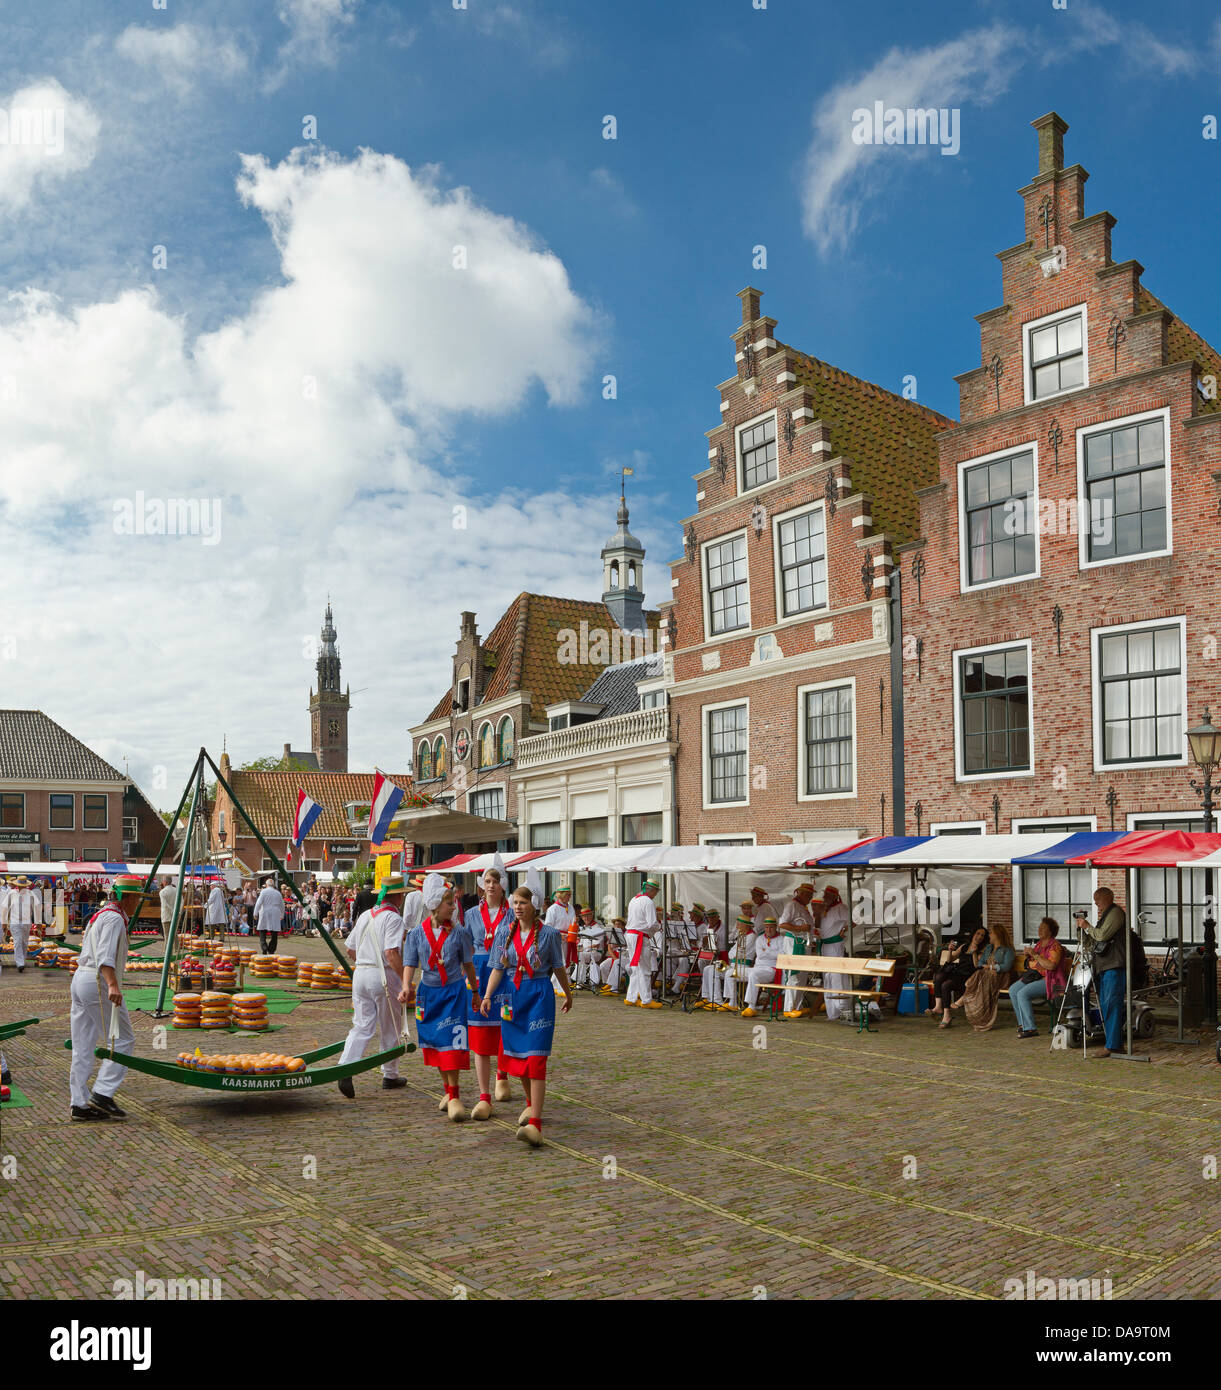 Netherlands, Holland, Europe, Edam, Cheese, market, city, tradition, village, summer, people, flags, Stock Photo